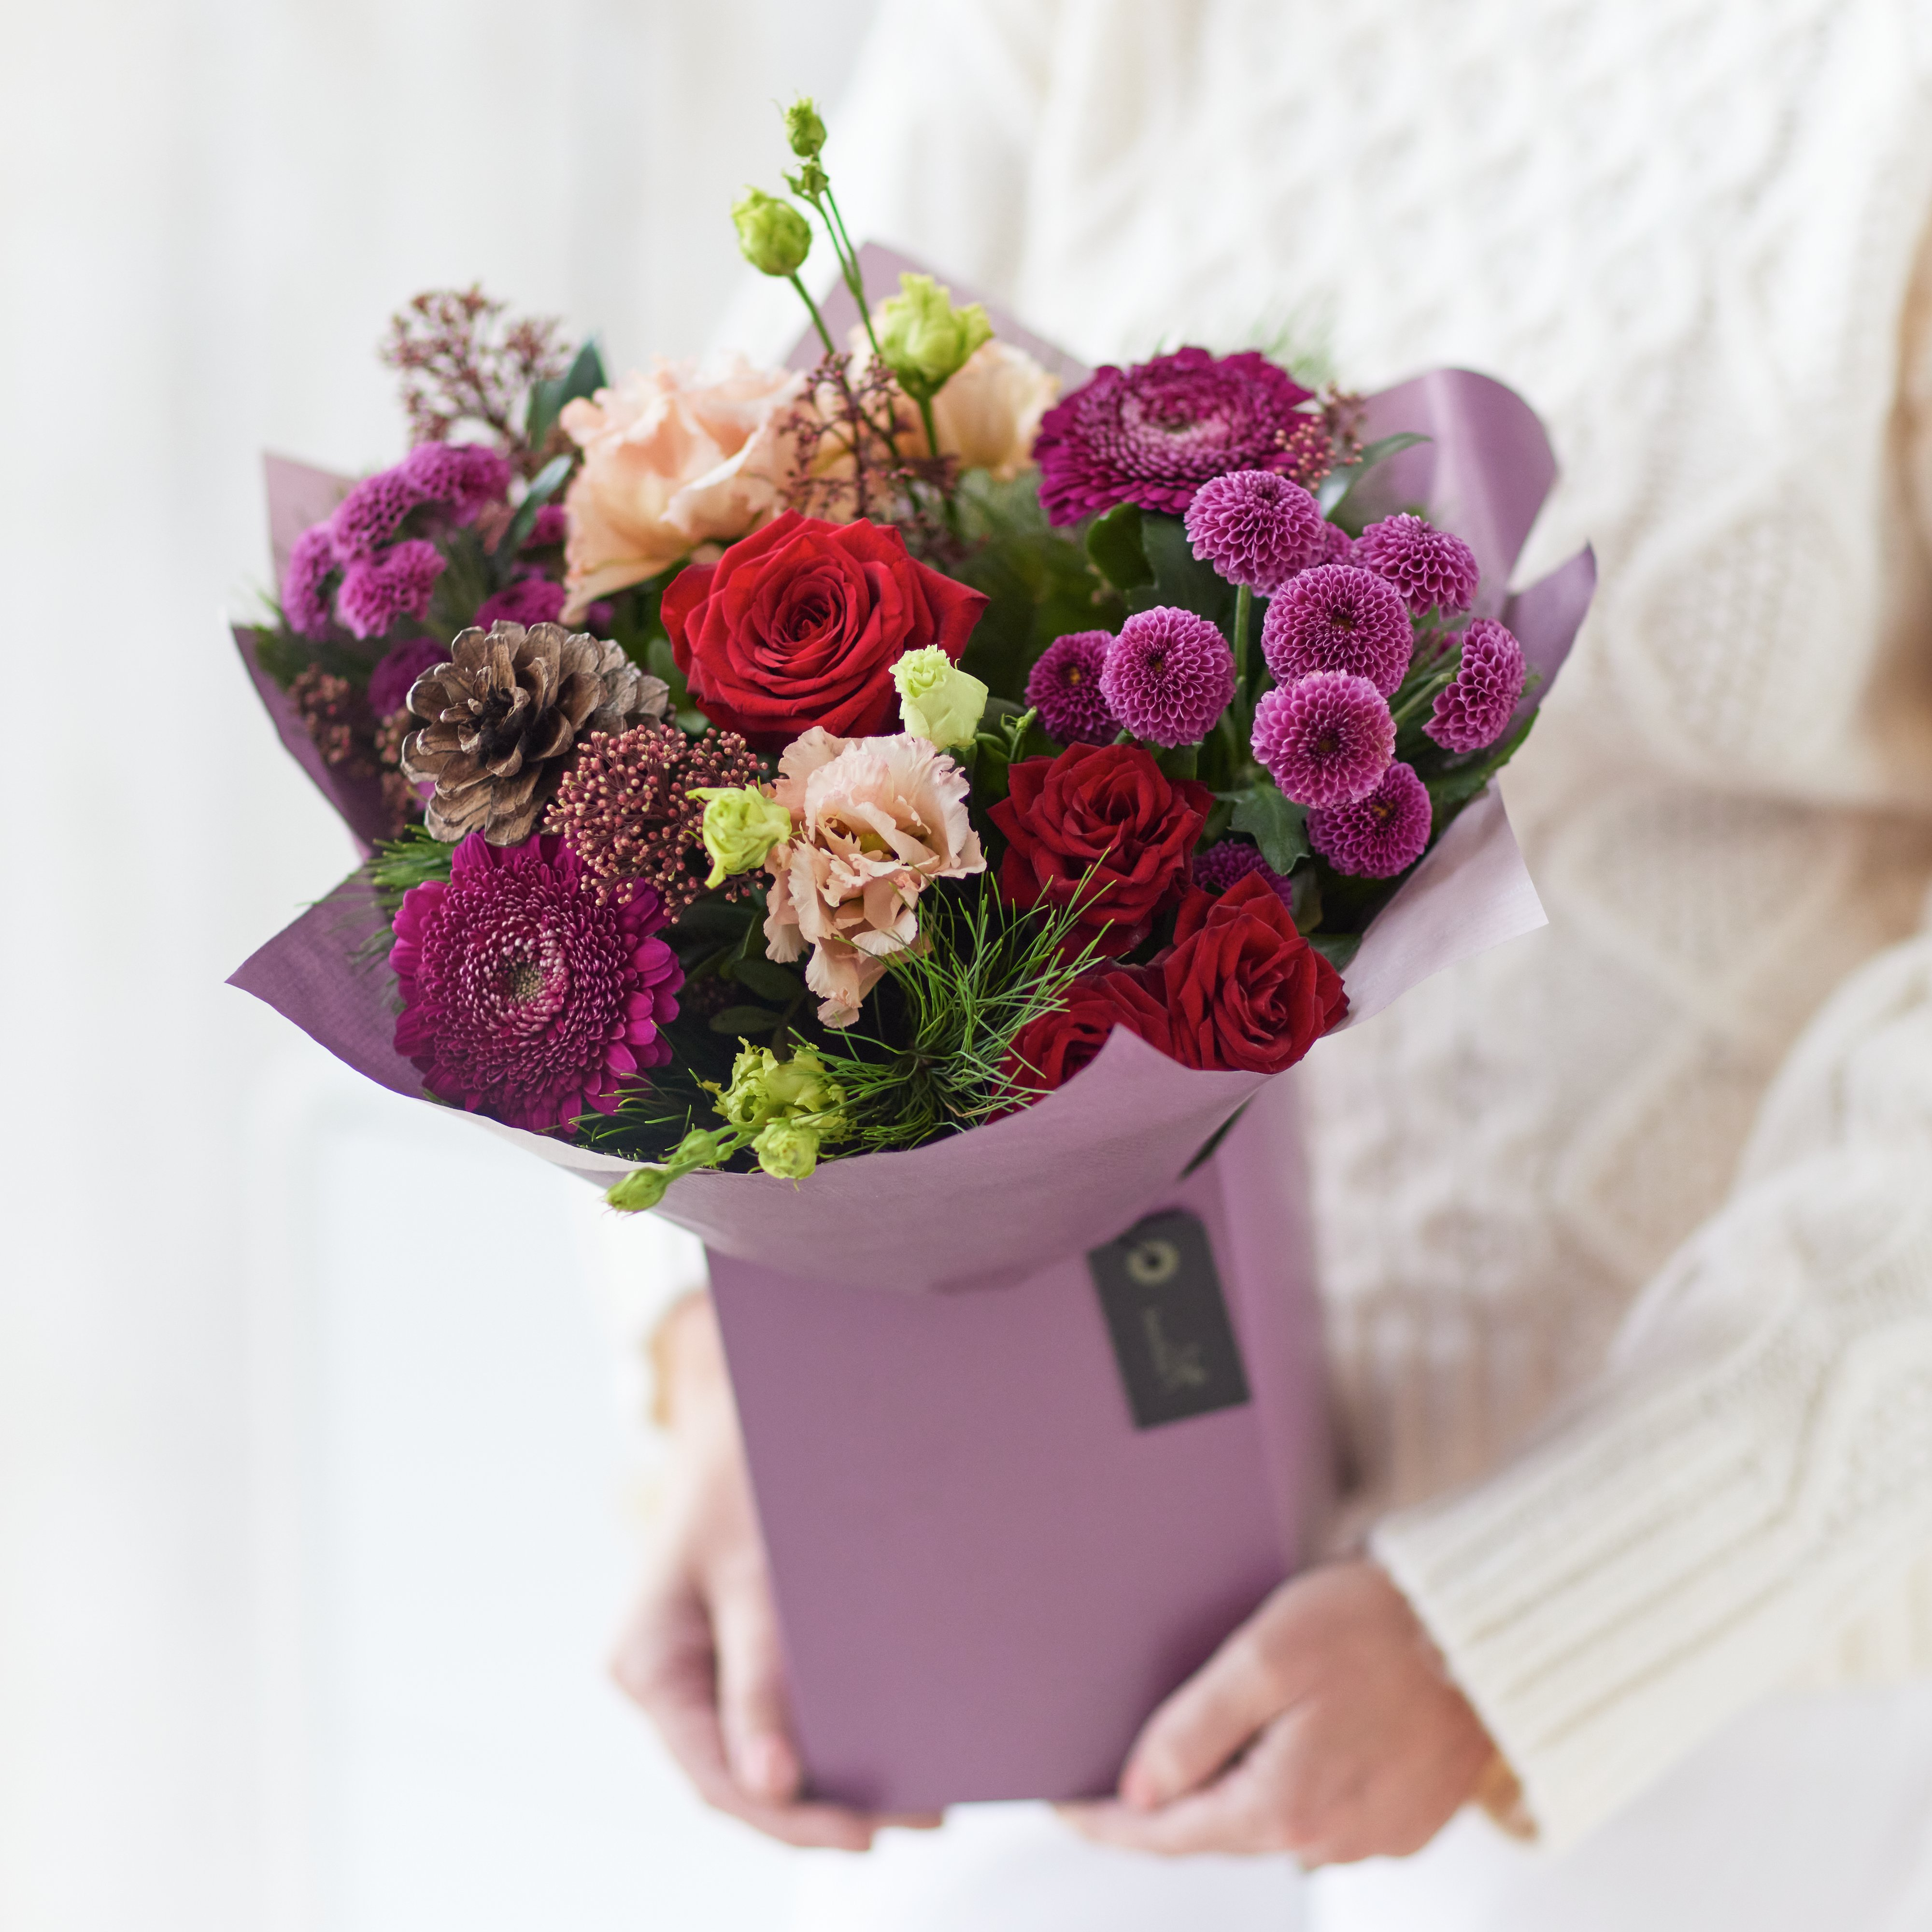 Winter Hand-tied Bouquet Made With The Finest Flowers